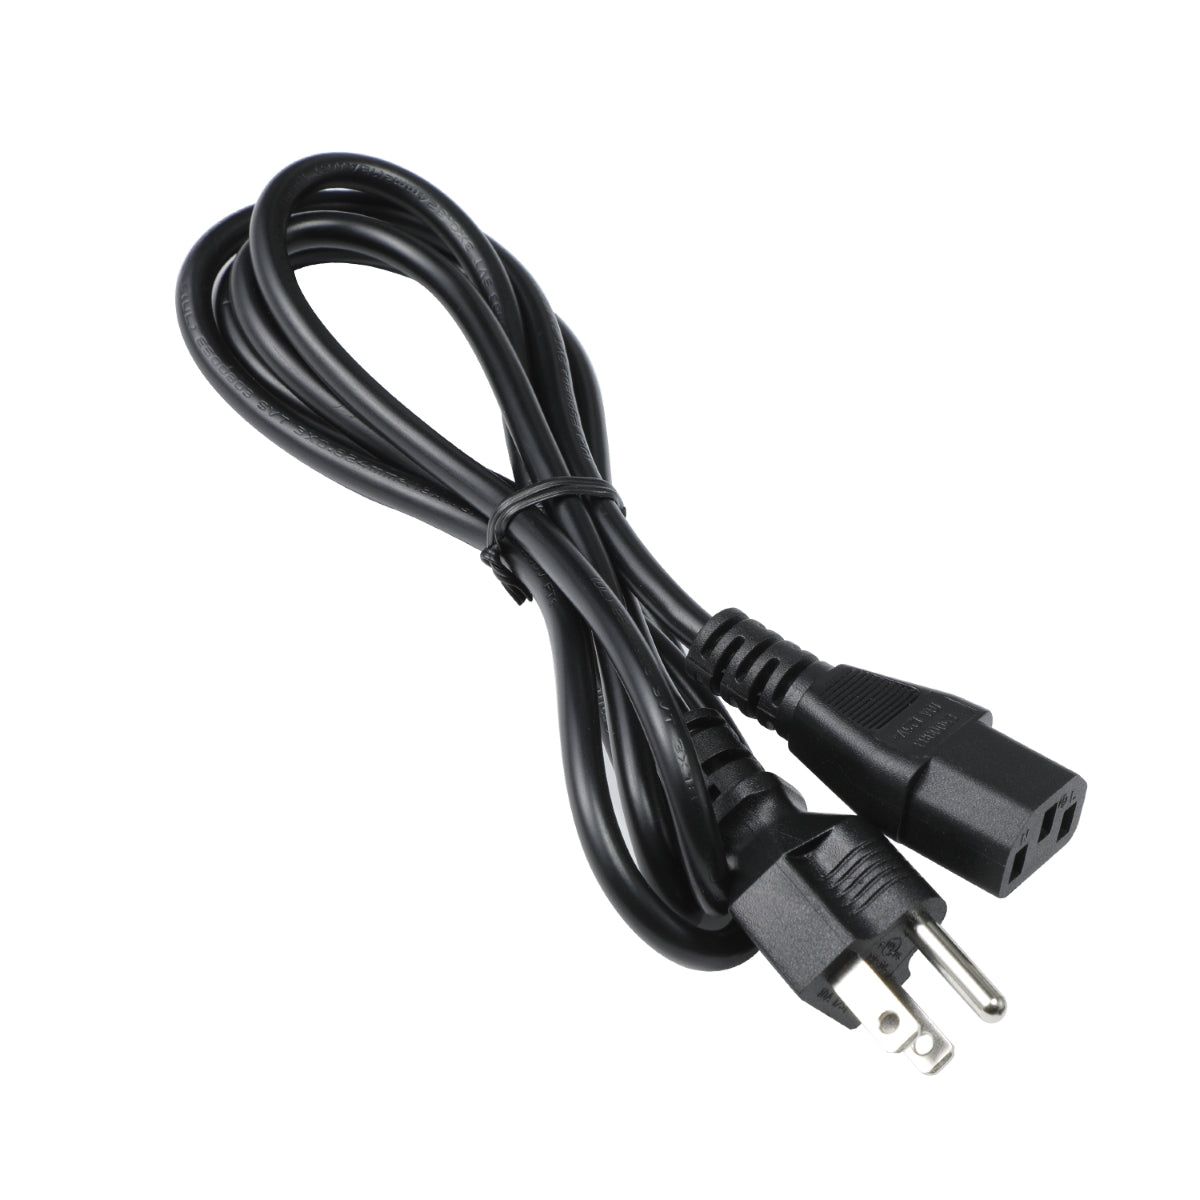 Power Cord for Dell S3422DWG Monitor